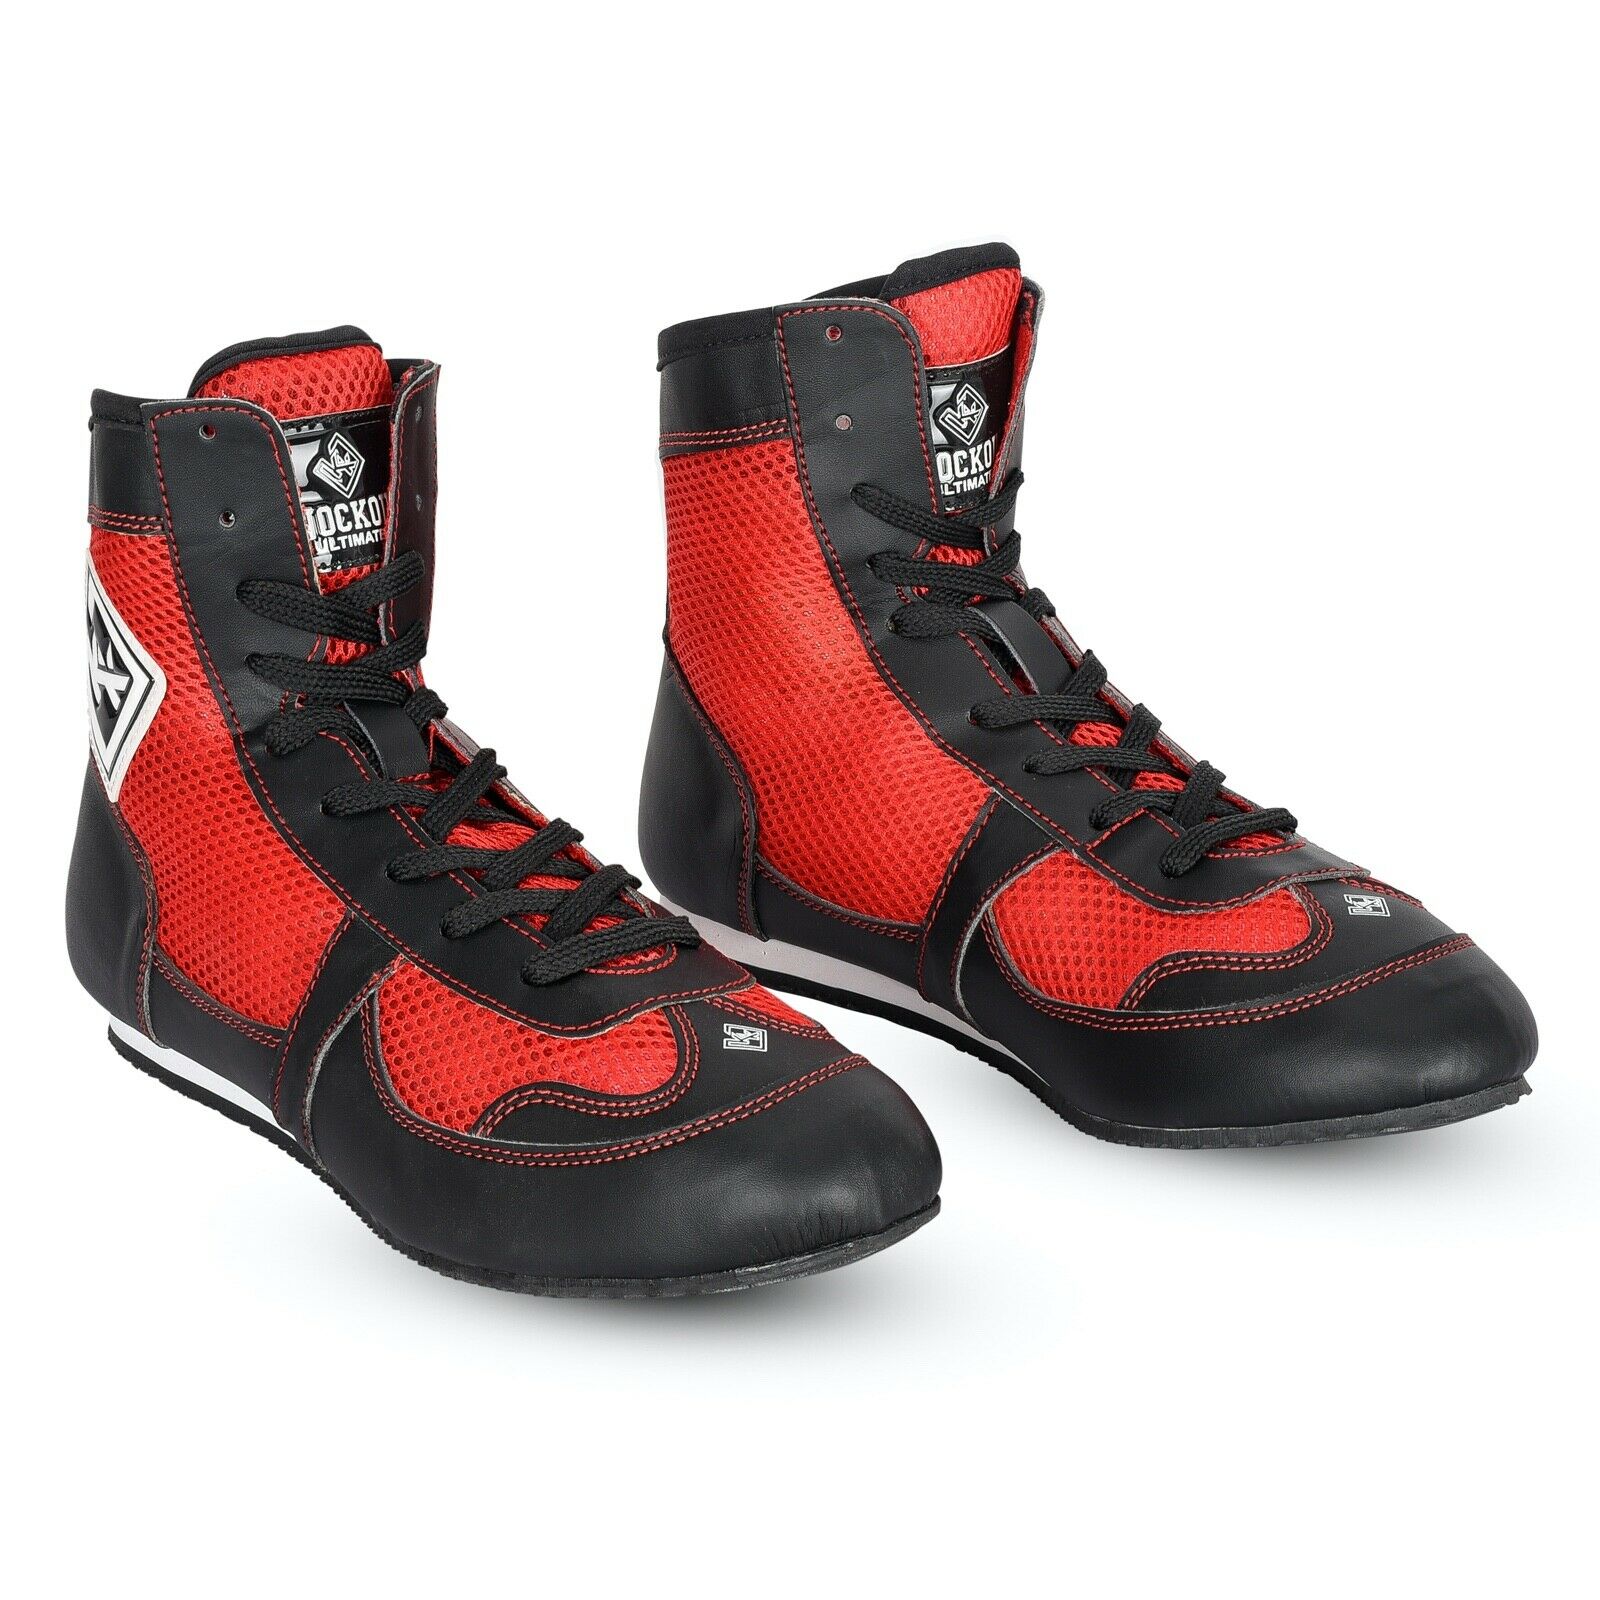 Knockout boxing Speed Elite Lightweight Mid-Length Boxing Shoes Rubber Soles UFC